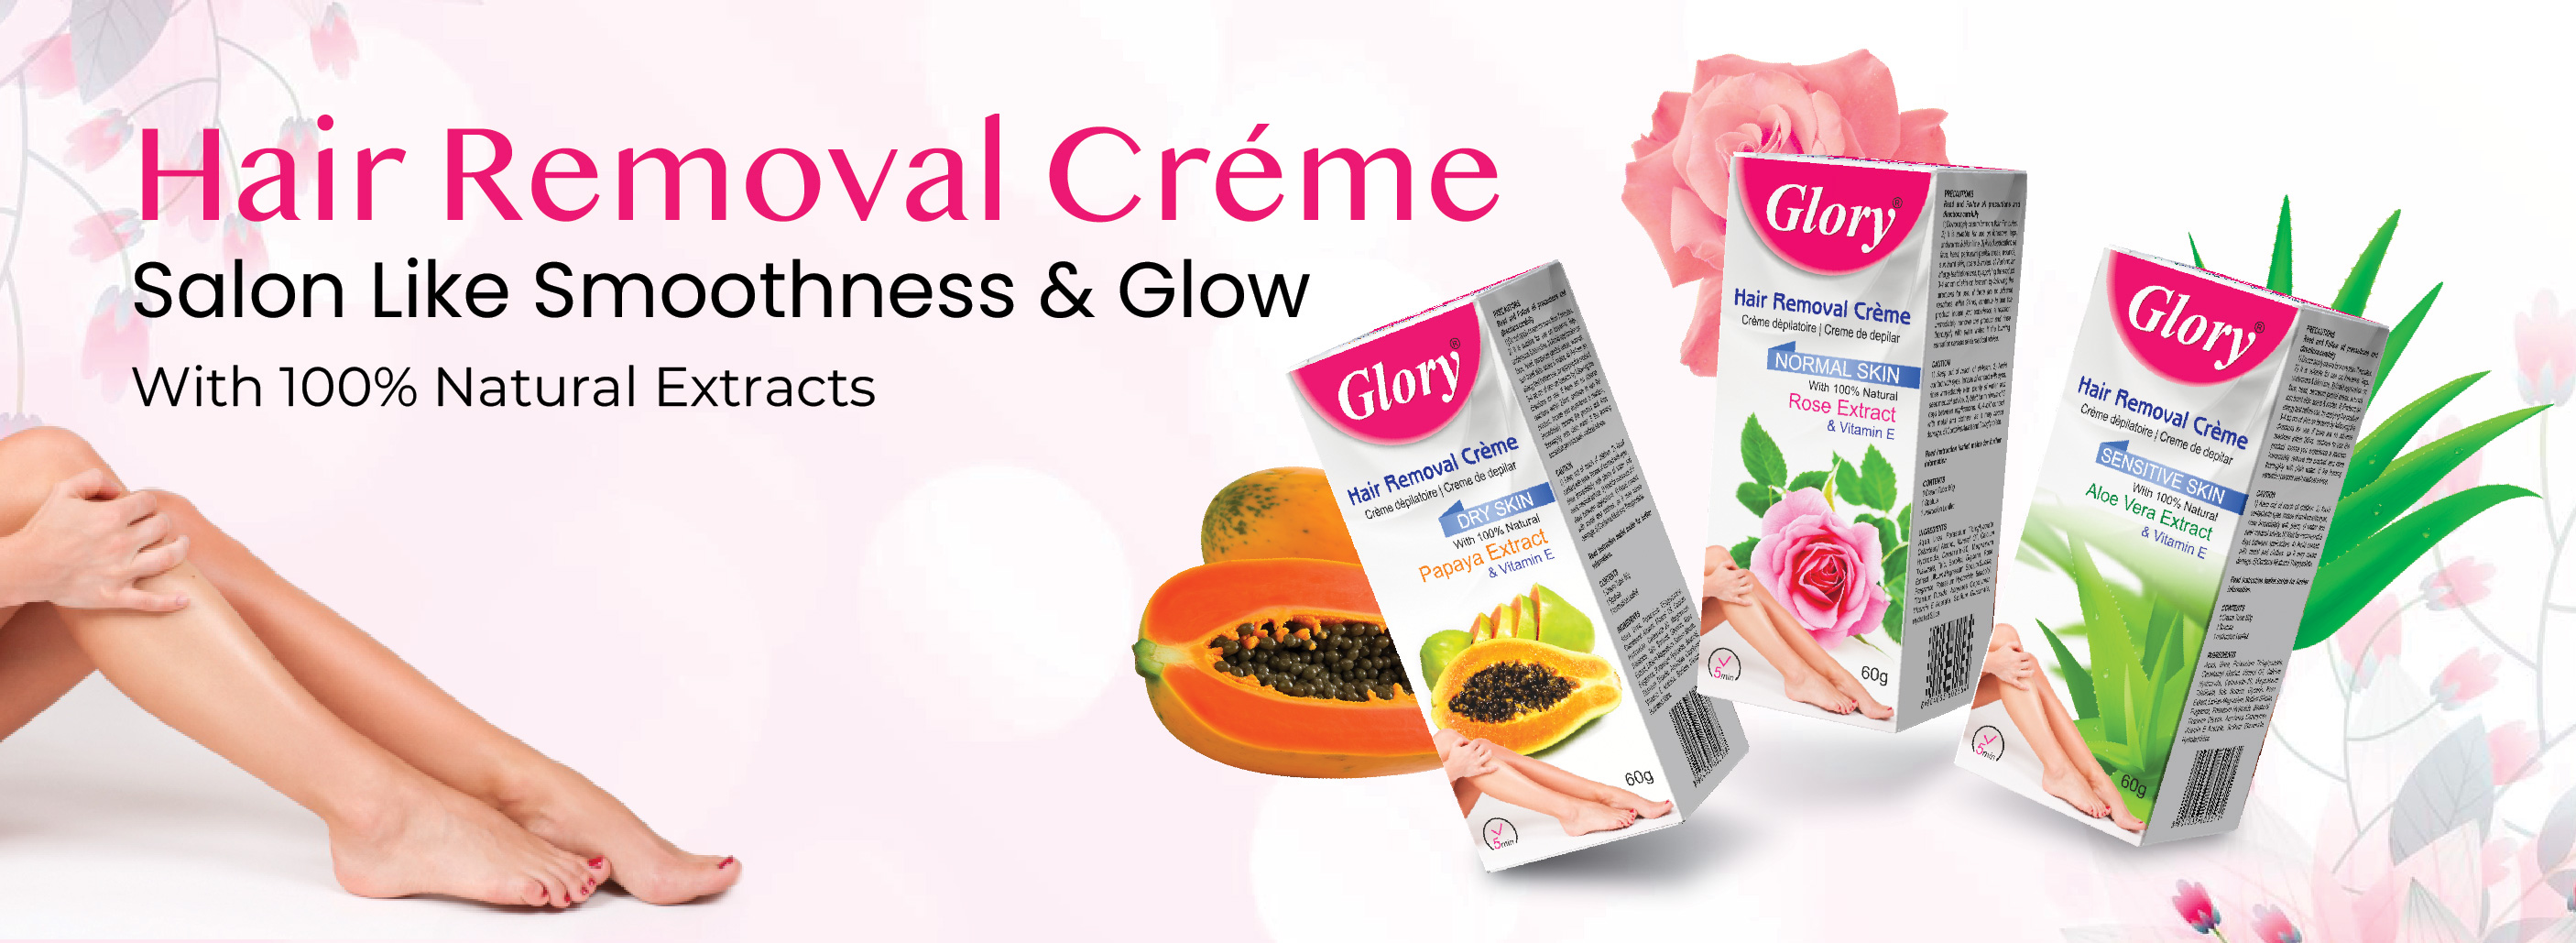 Hair Removal Creme Manufacturer | Hair Removal Creme Manufacturer in Philippines